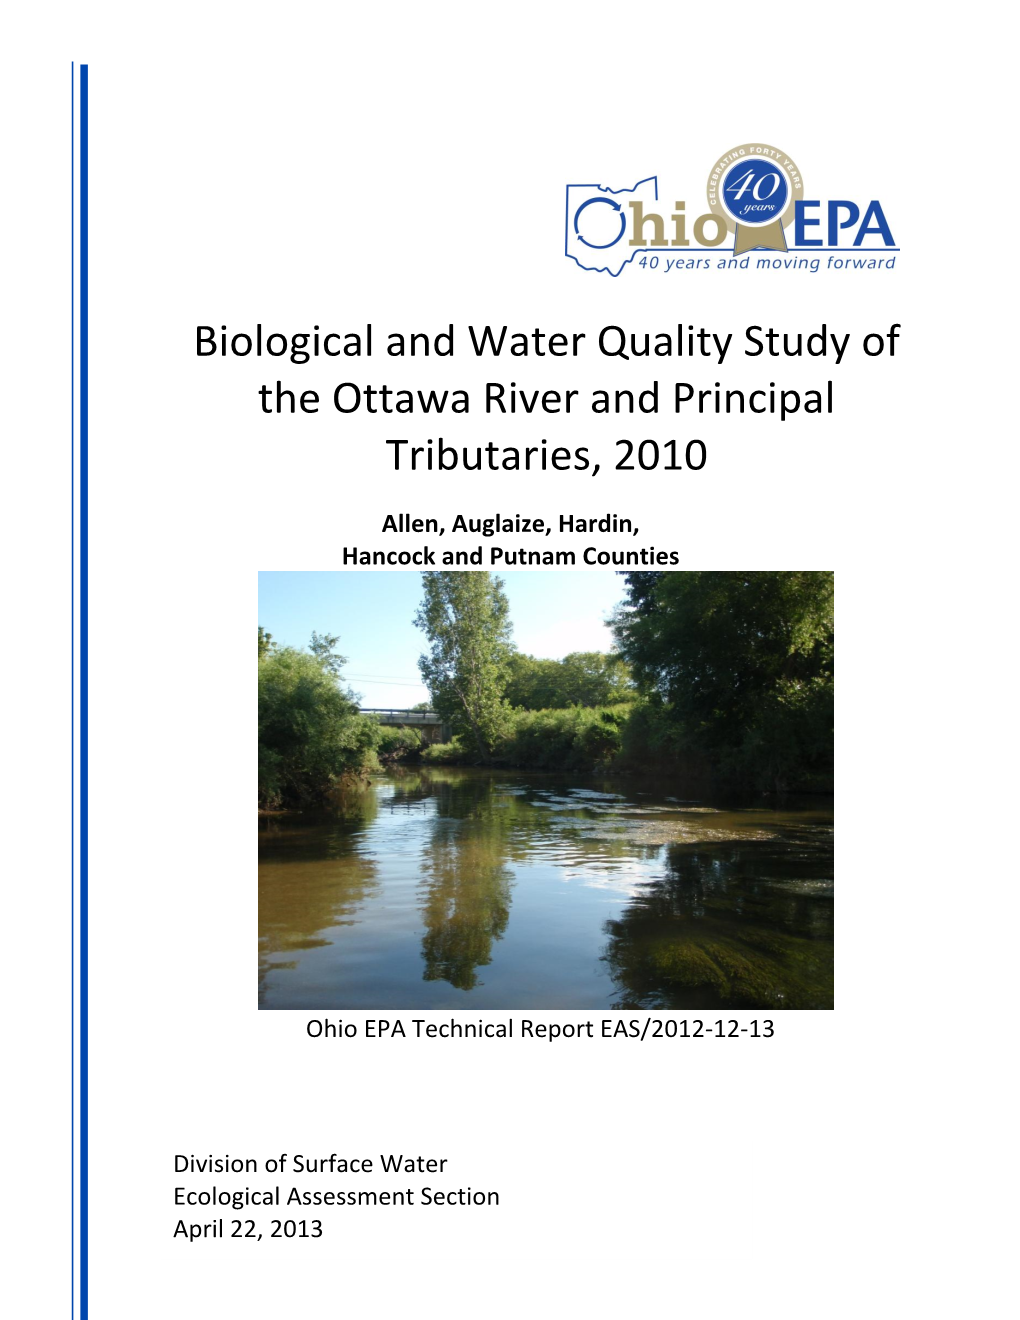 Biological and Water Quality Study of the Ottawa River and Principal